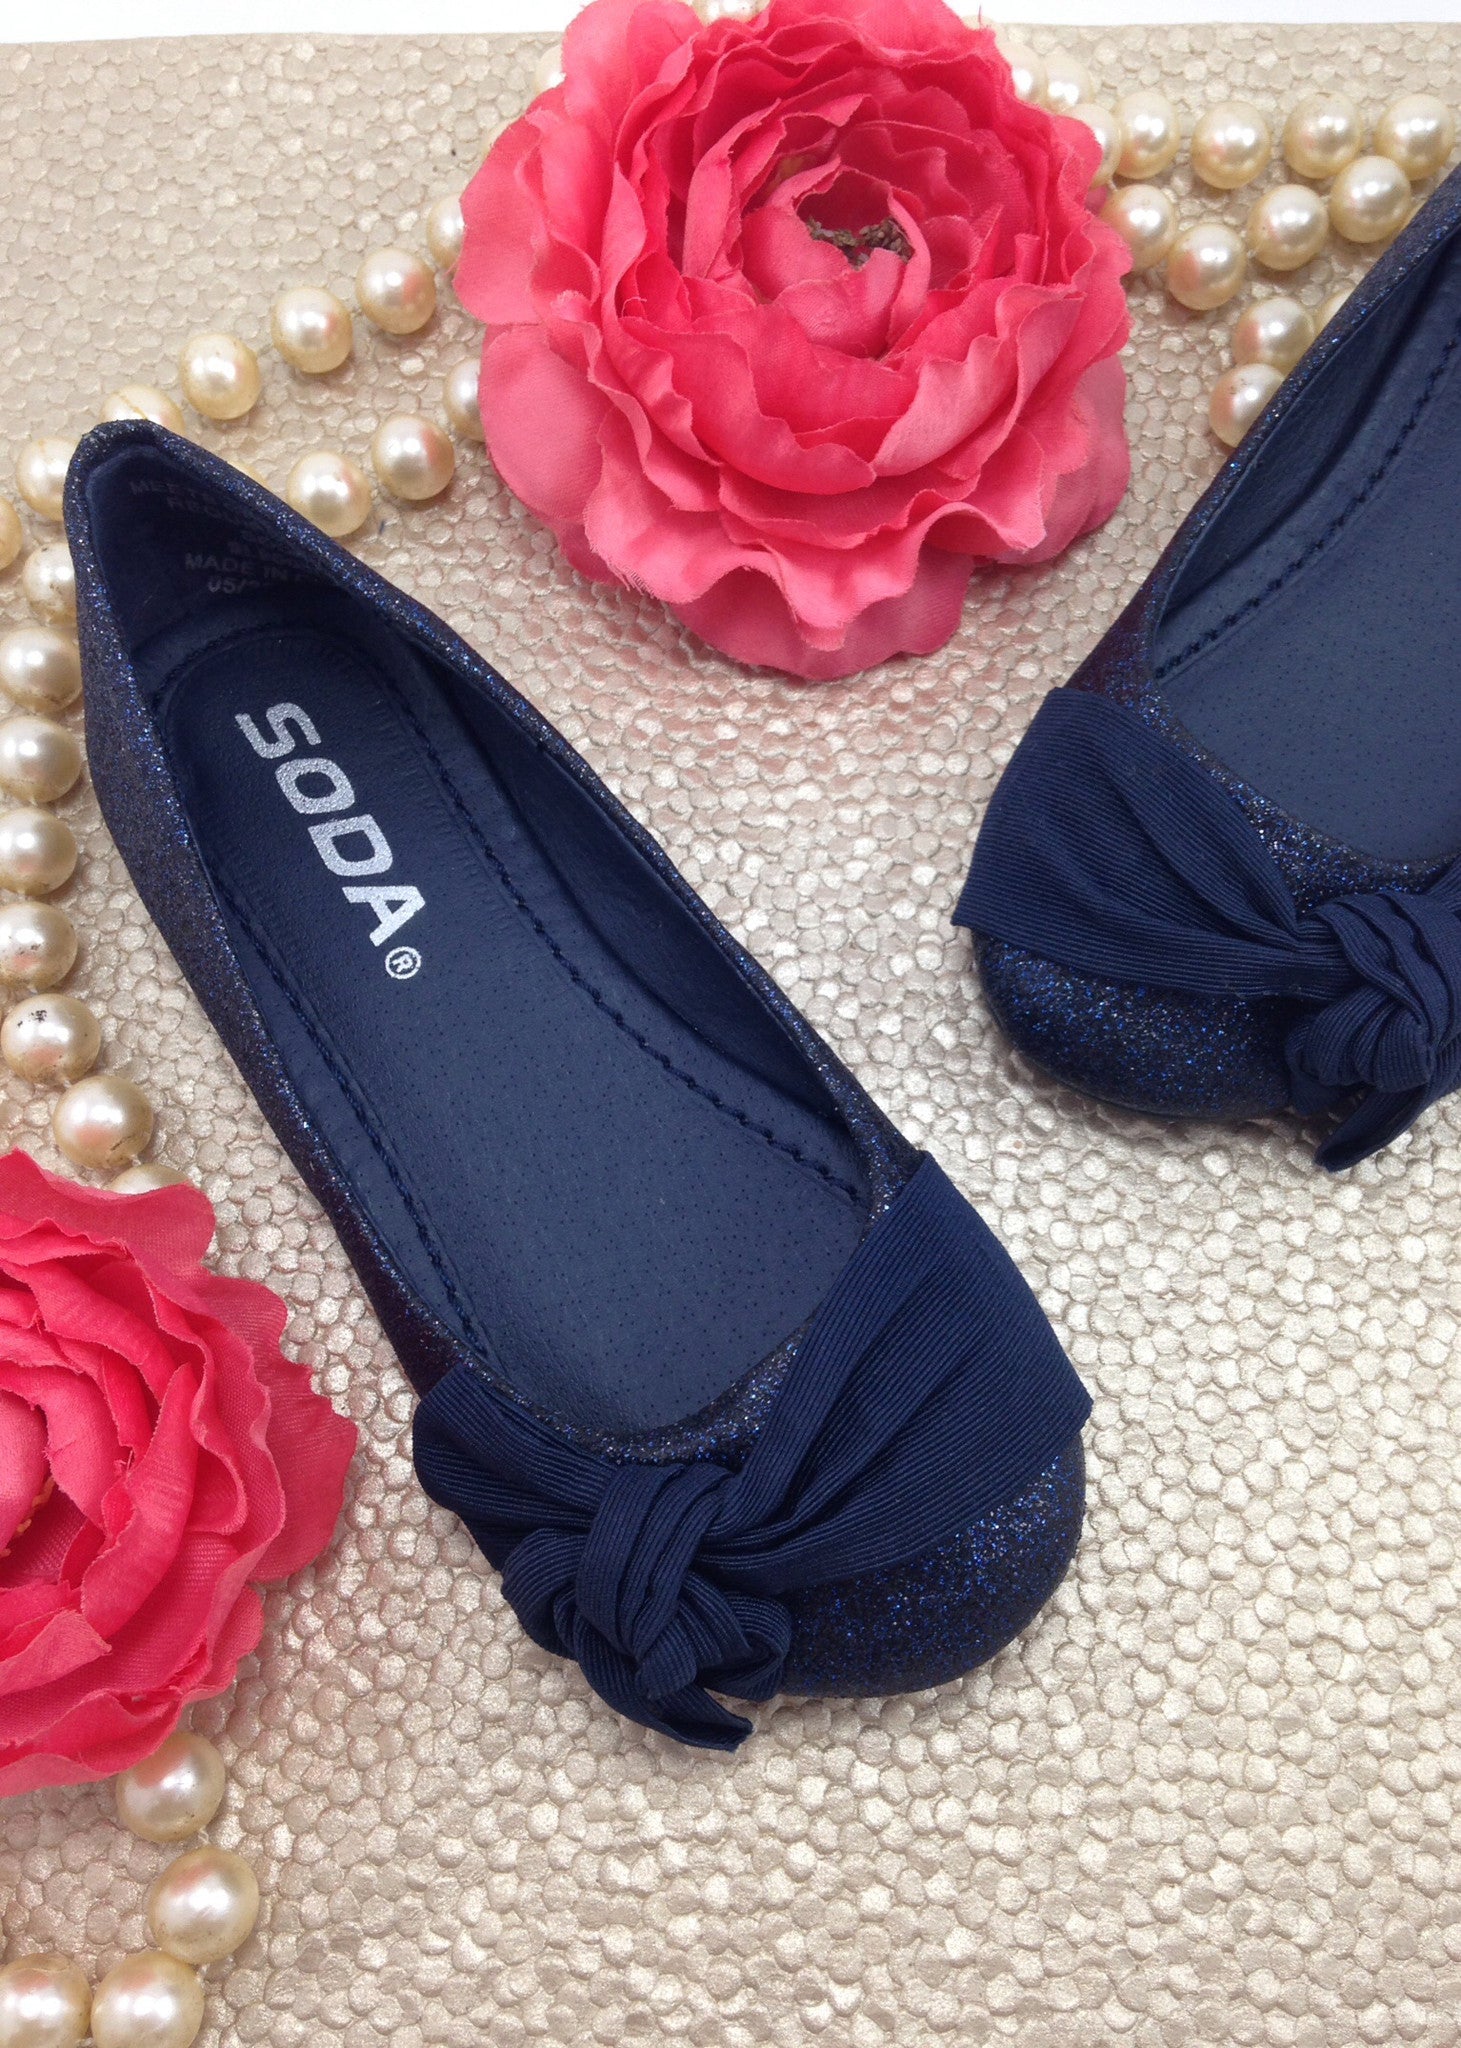 navy blue shoes with bow